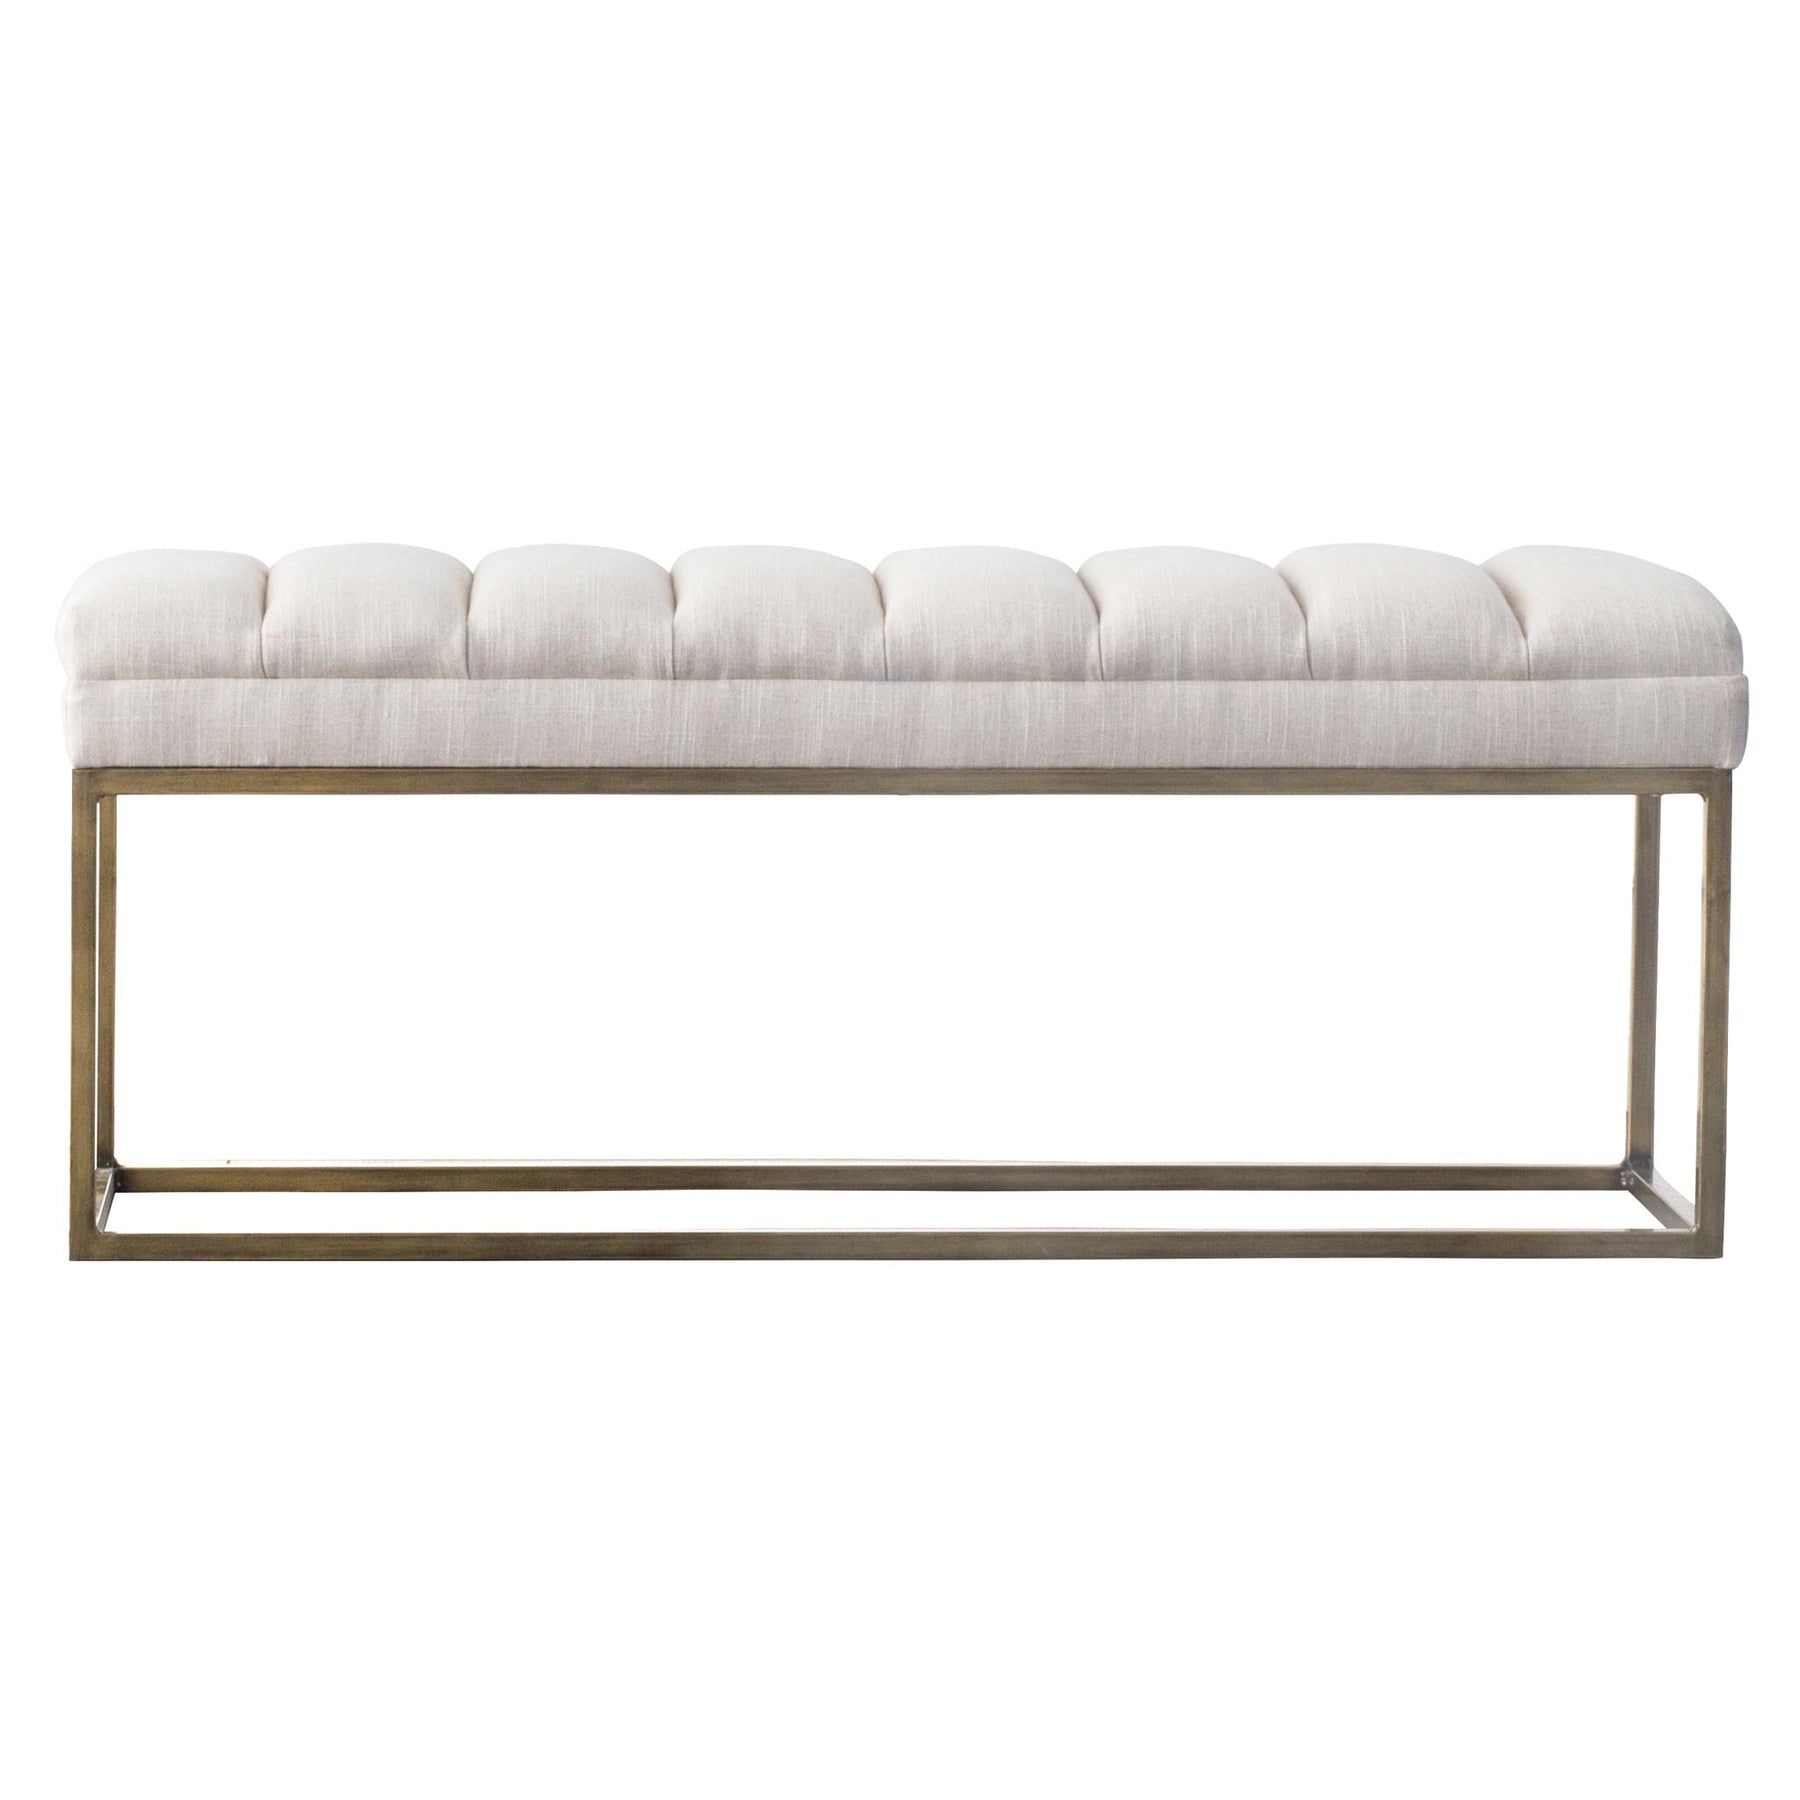 Darius Fabric Bench by New Pacific Direct - 3900029